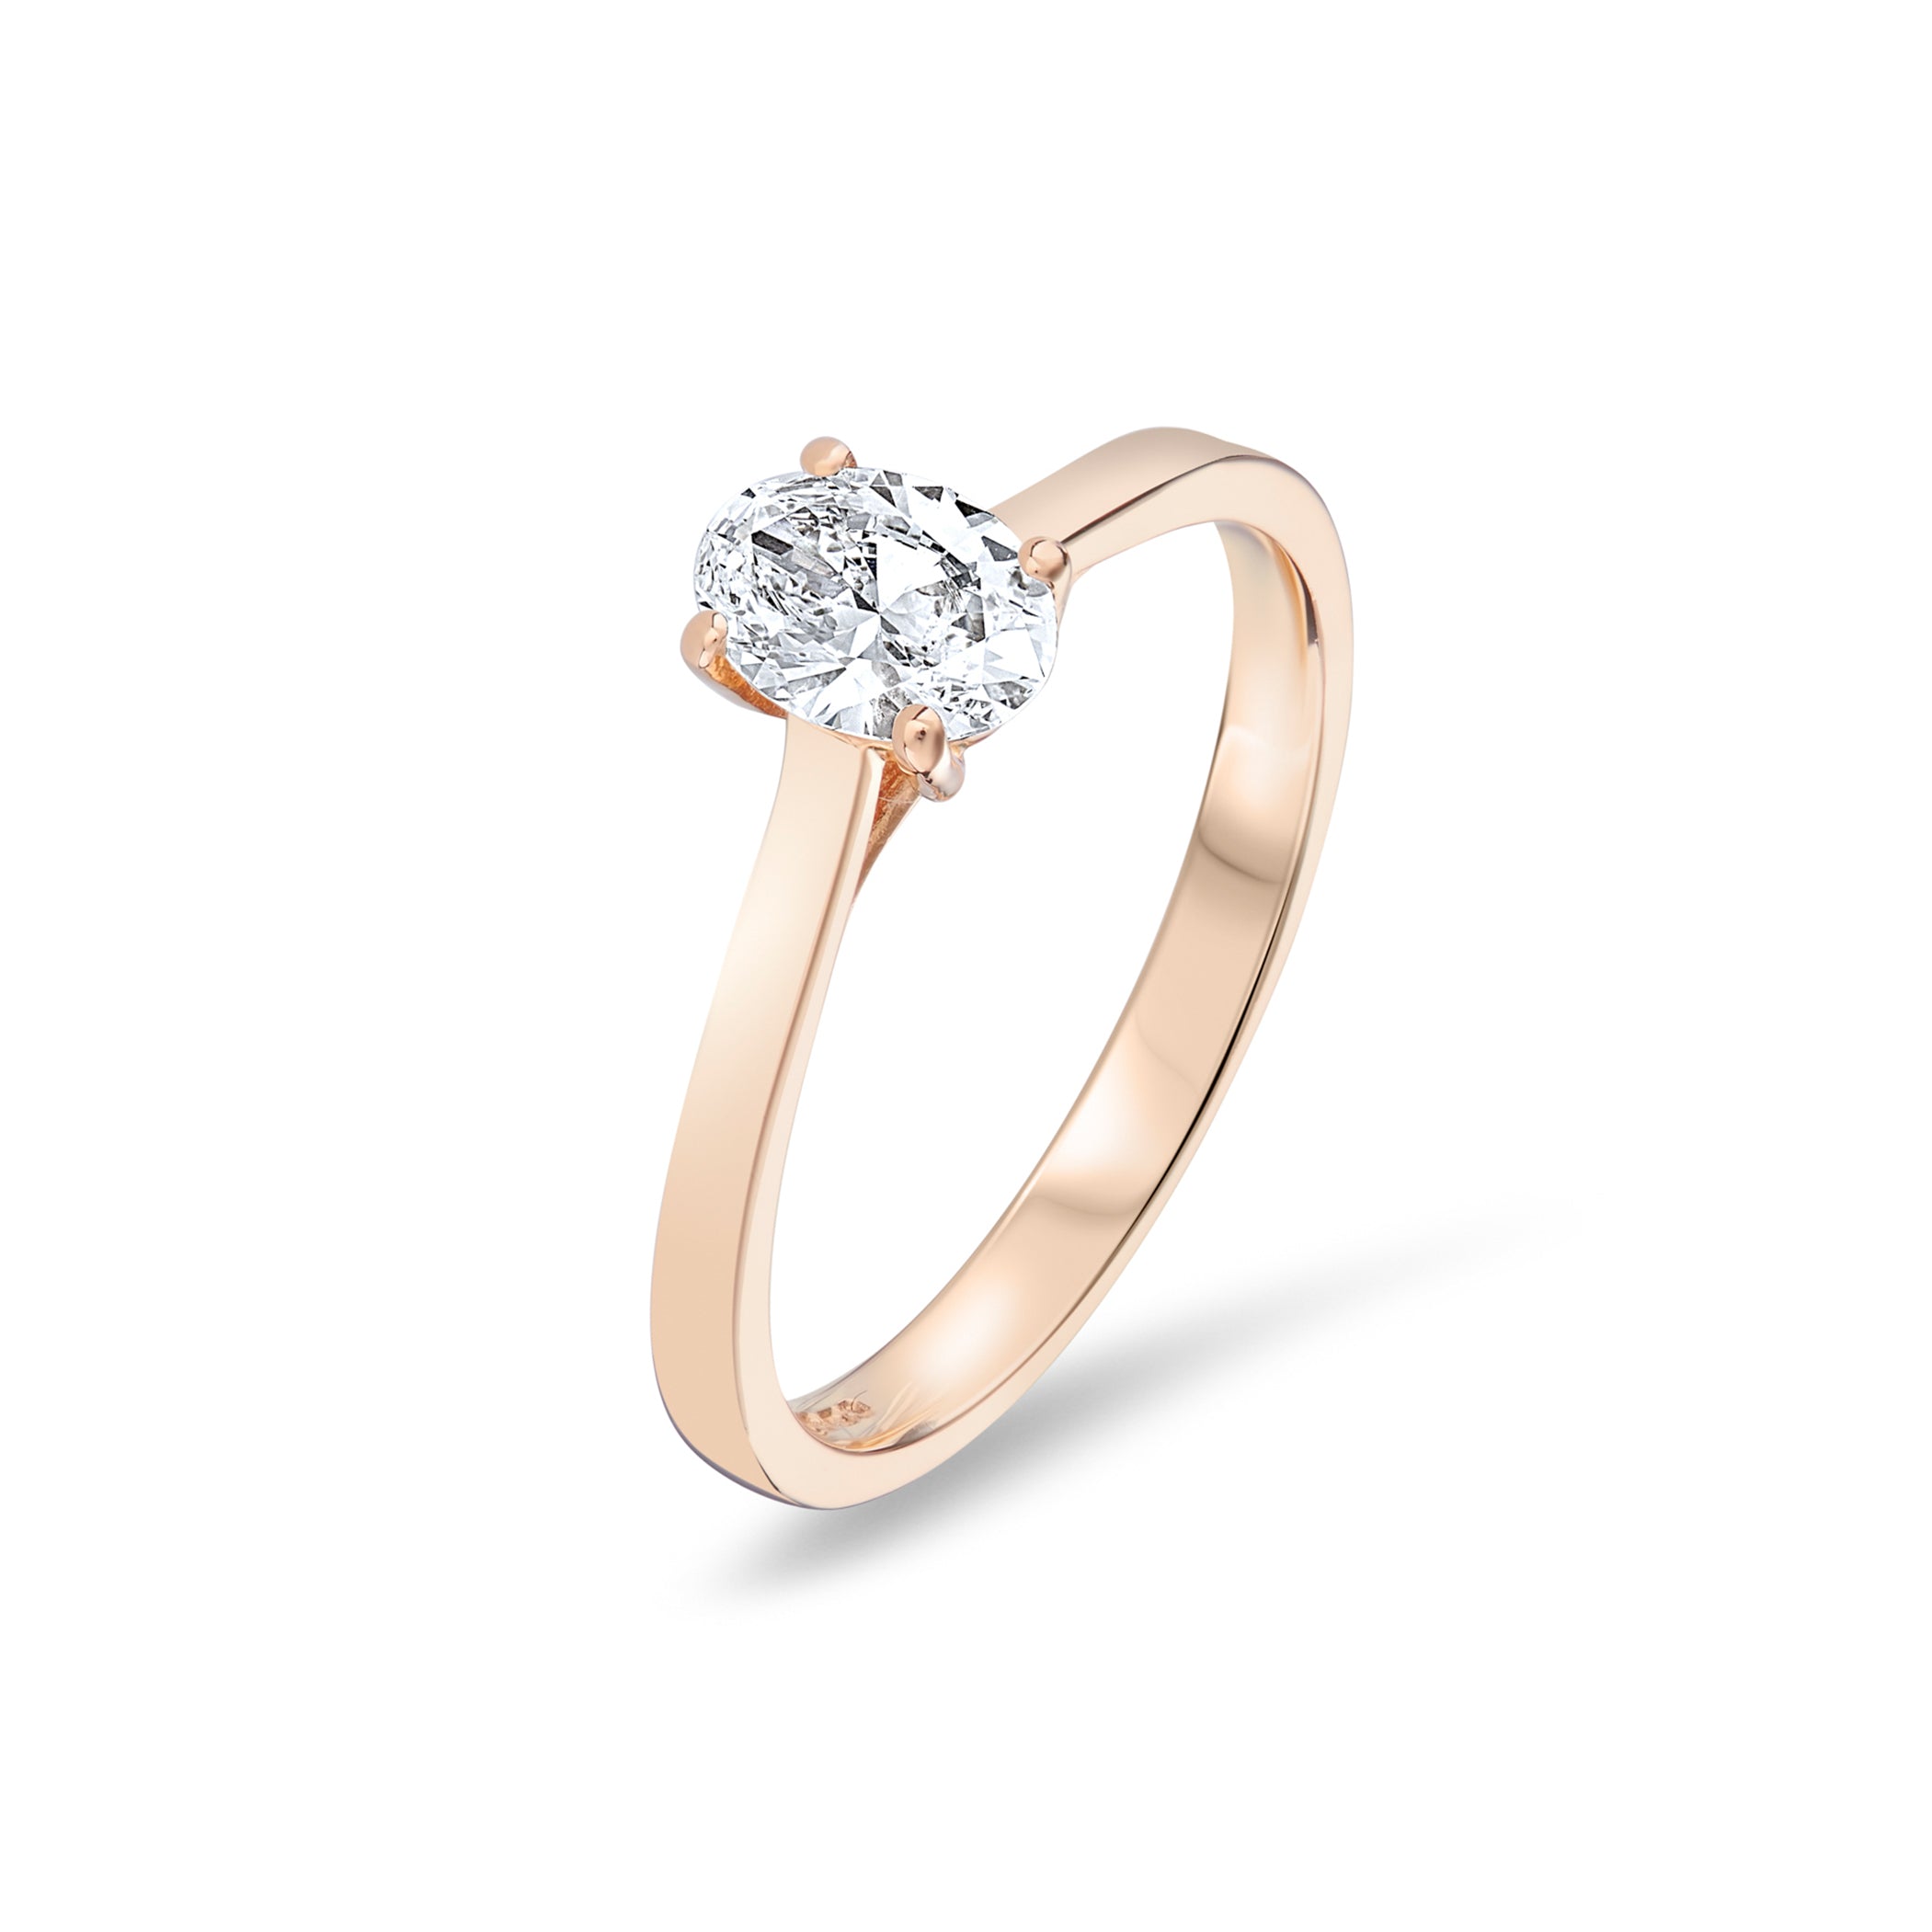 Oval Solitaire Diamond Engagement Ring in 18ct Rose Gold